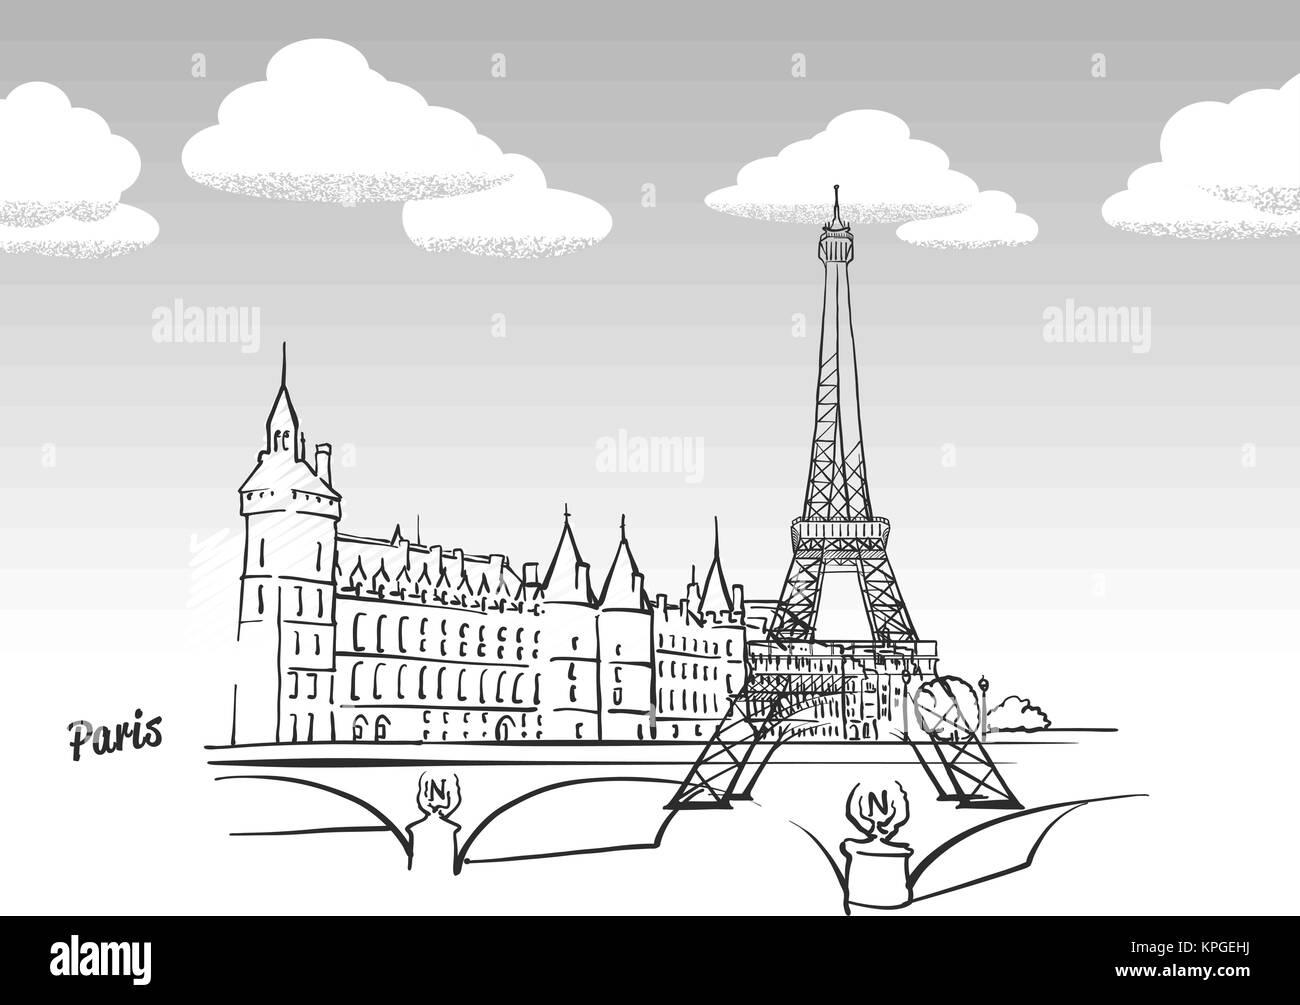 Paris, France famous landmark sketch. Lineart drawing by hand. Greeting card icon with title, vector illustration Stock Vector